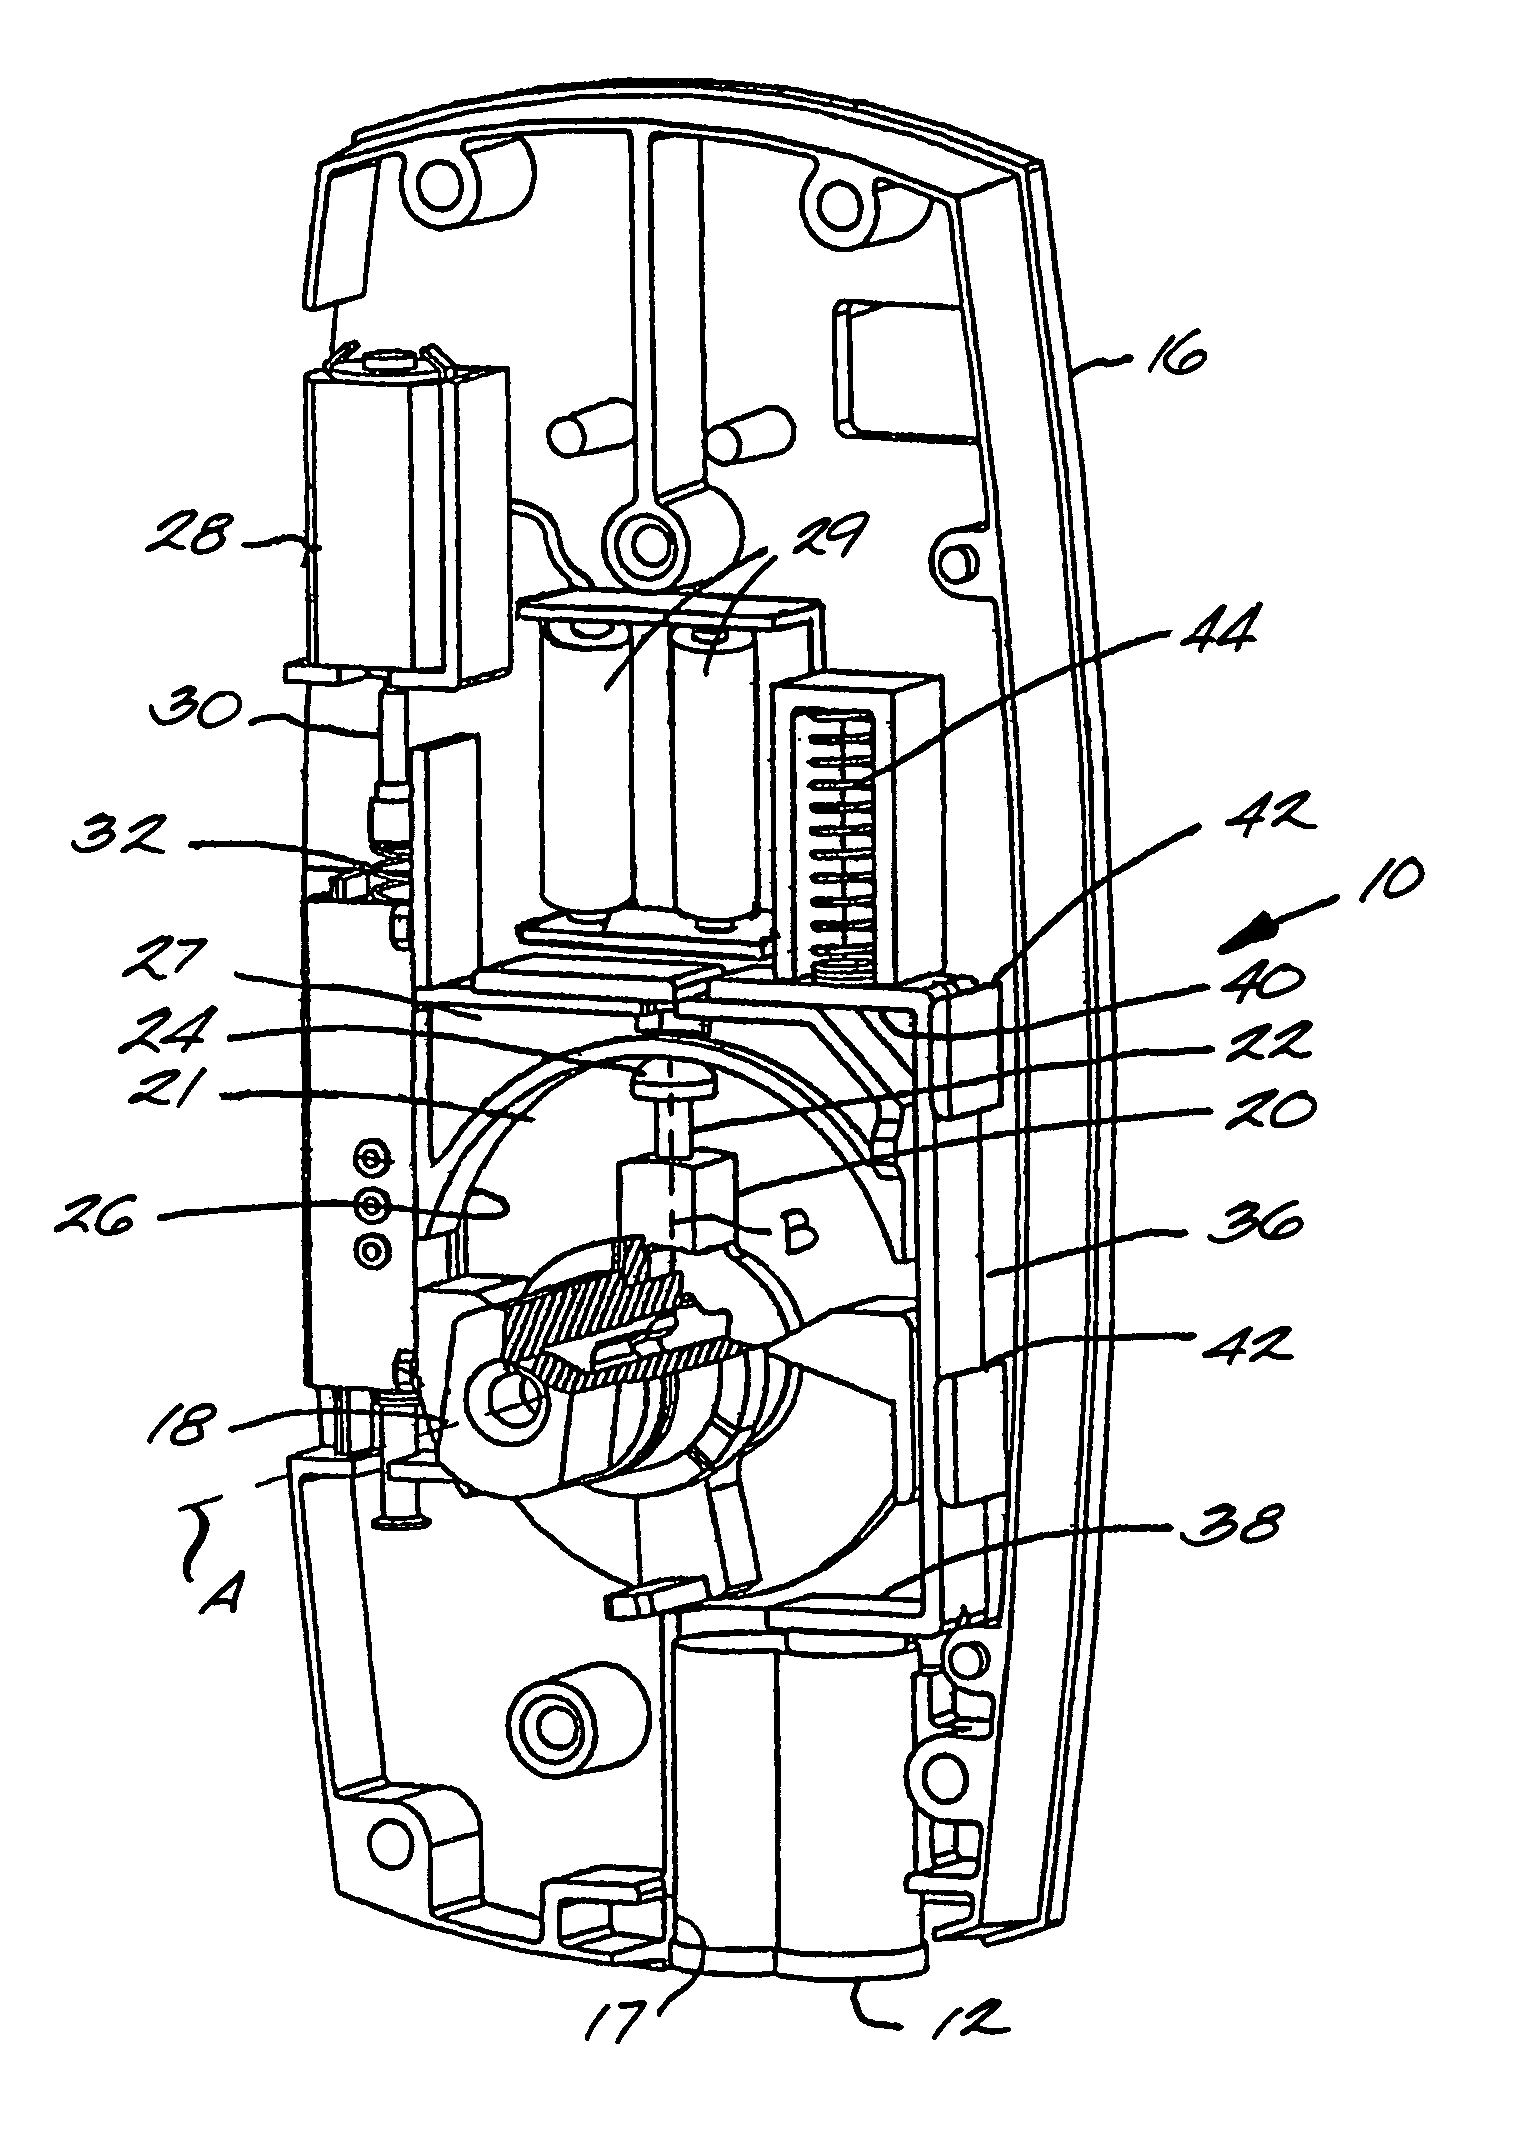 Override assembly for door lock systems having a clutch mechanism